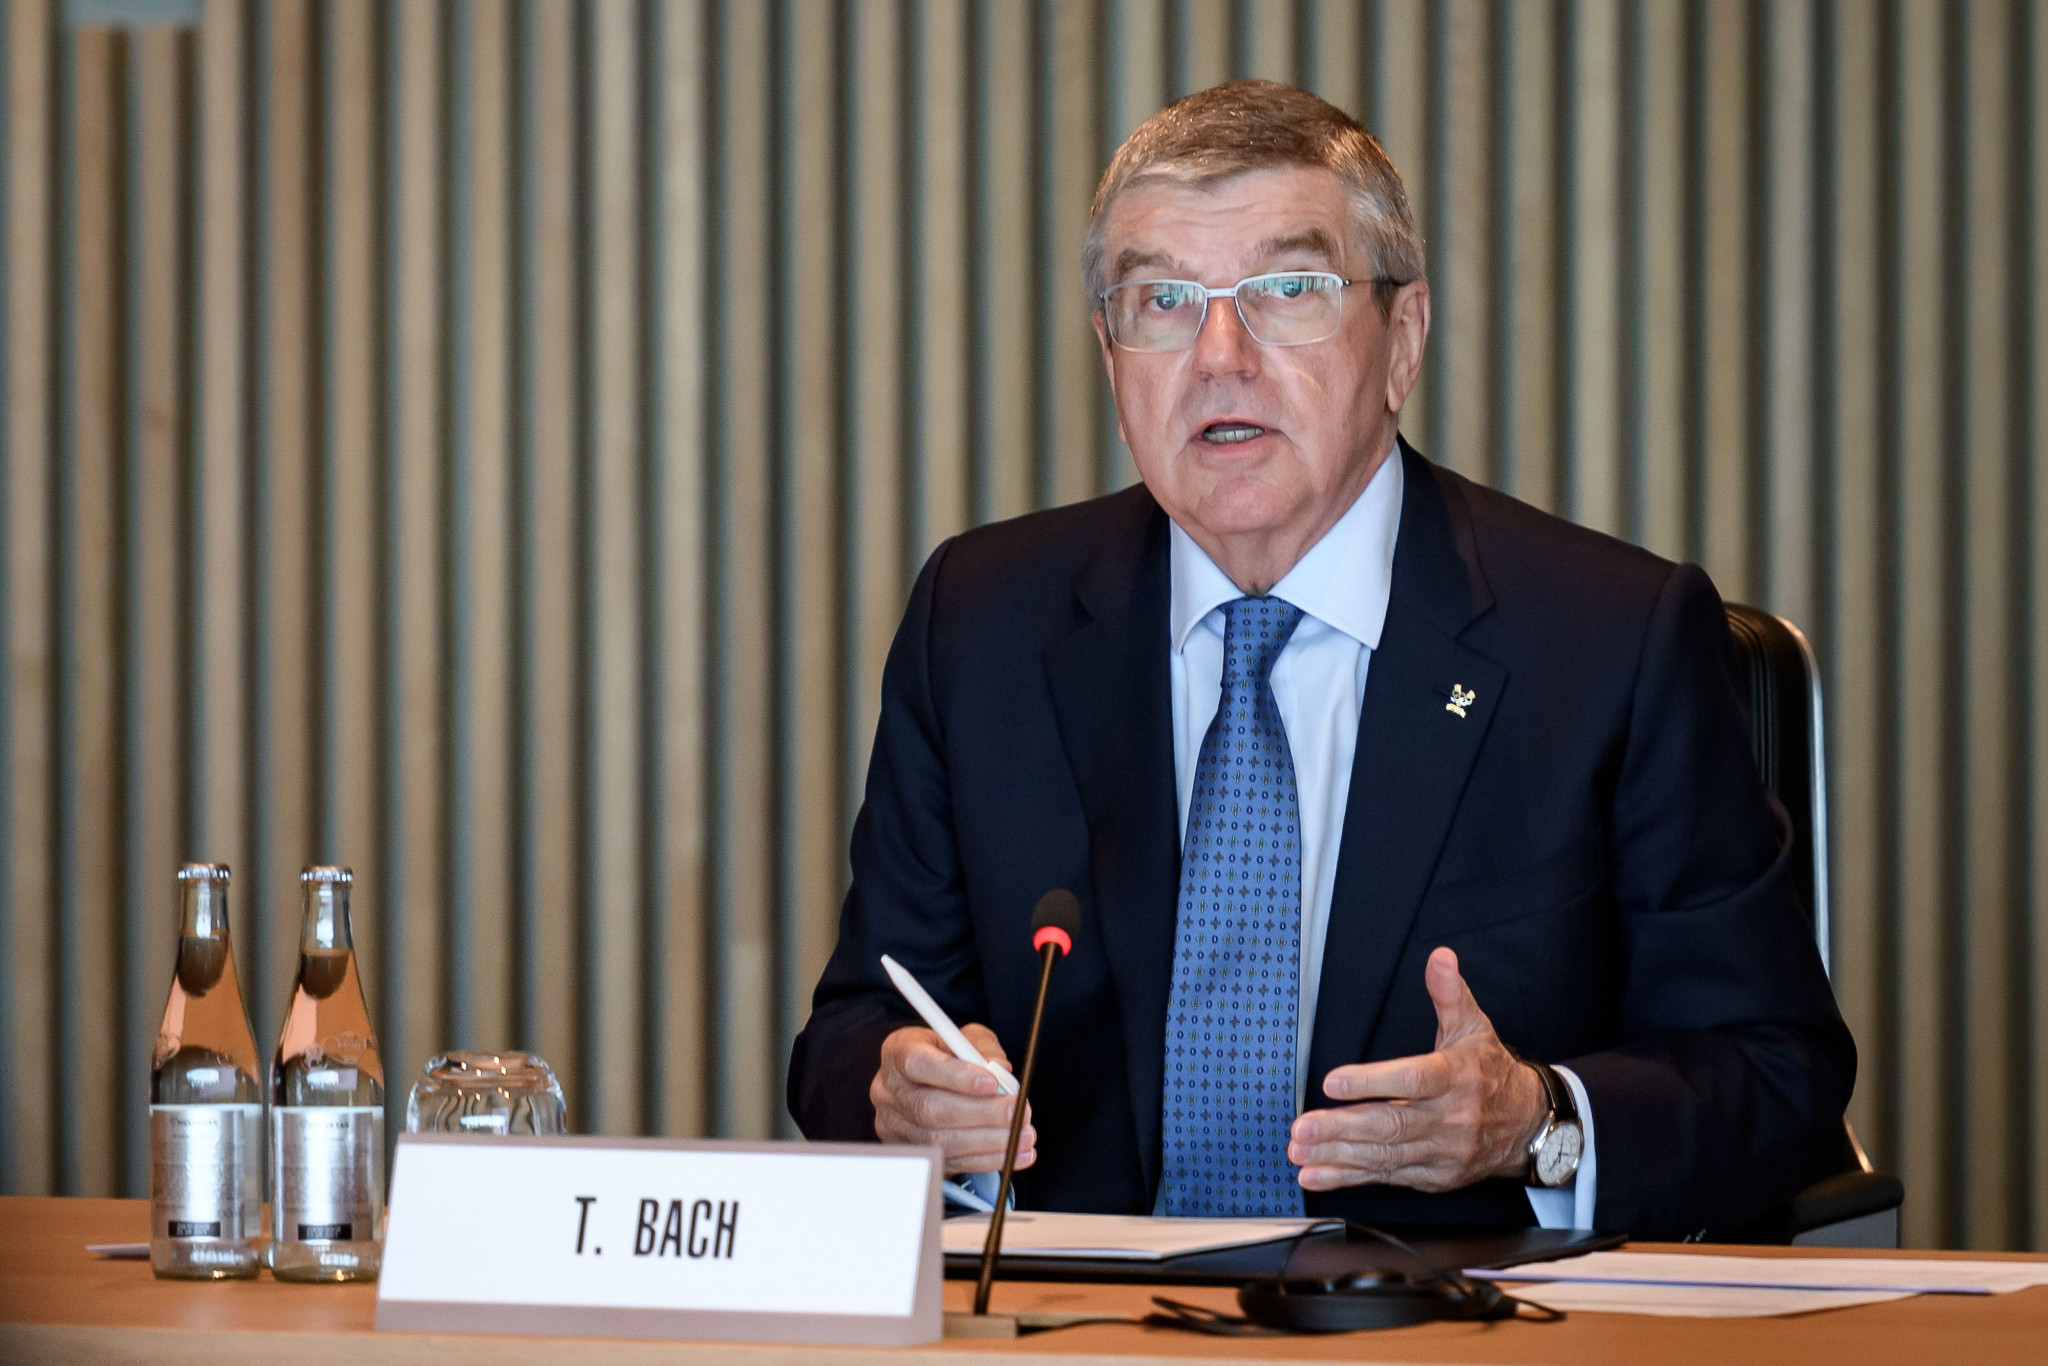 International Olympic Committee President Thomas Bach has repeatedly voiced concerns about weightlifting's governance ©Getty Images